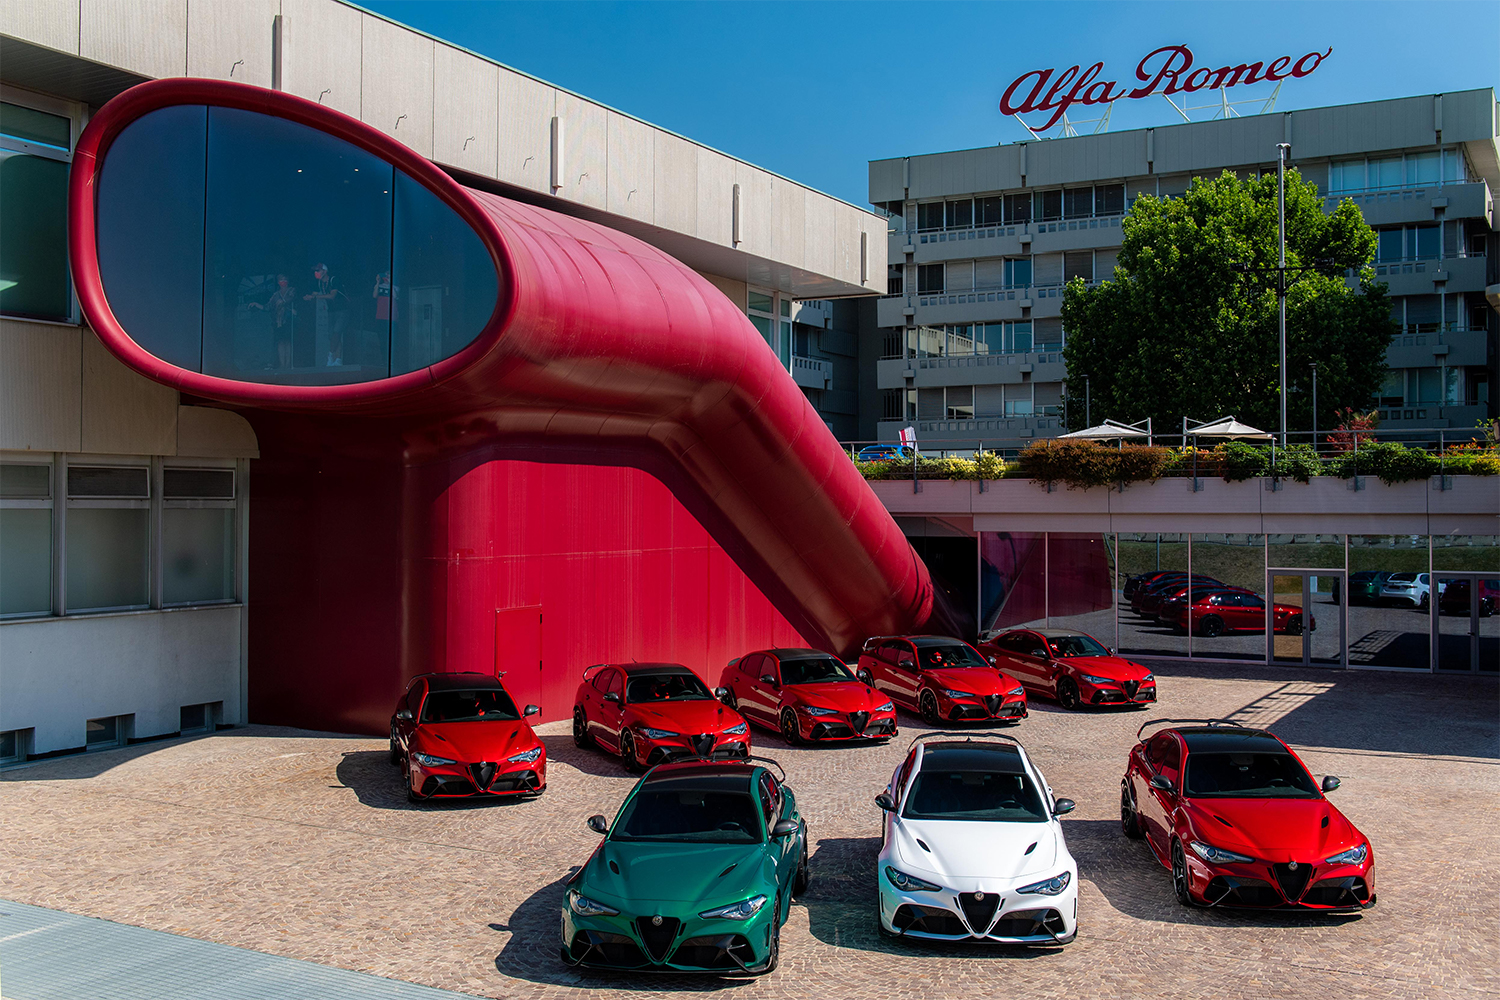 Alfa Romeo's vehicles lined up in red, green and white for the brand's 111th anniversary